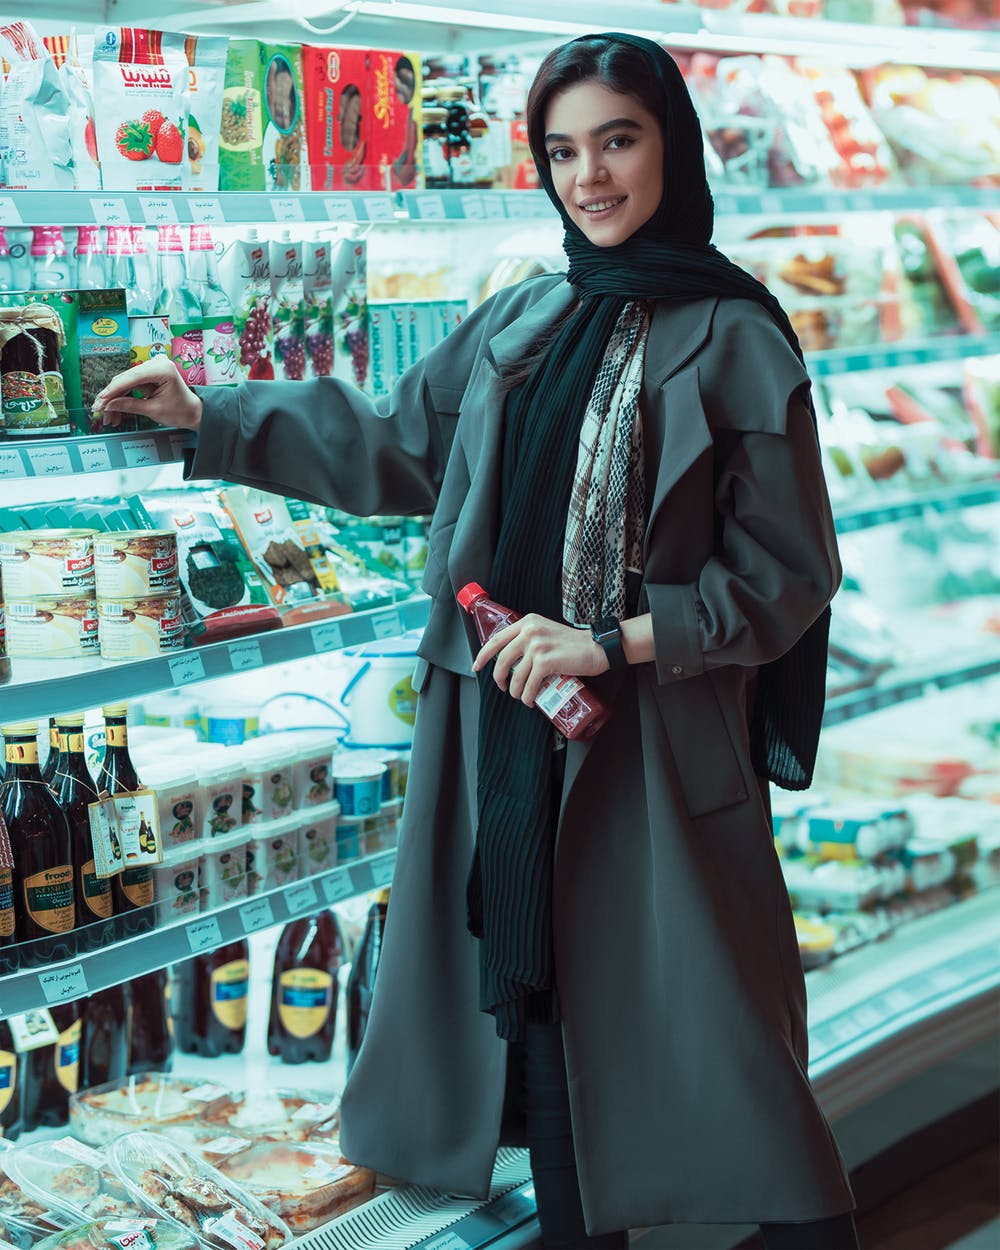 woman inside a grocery store